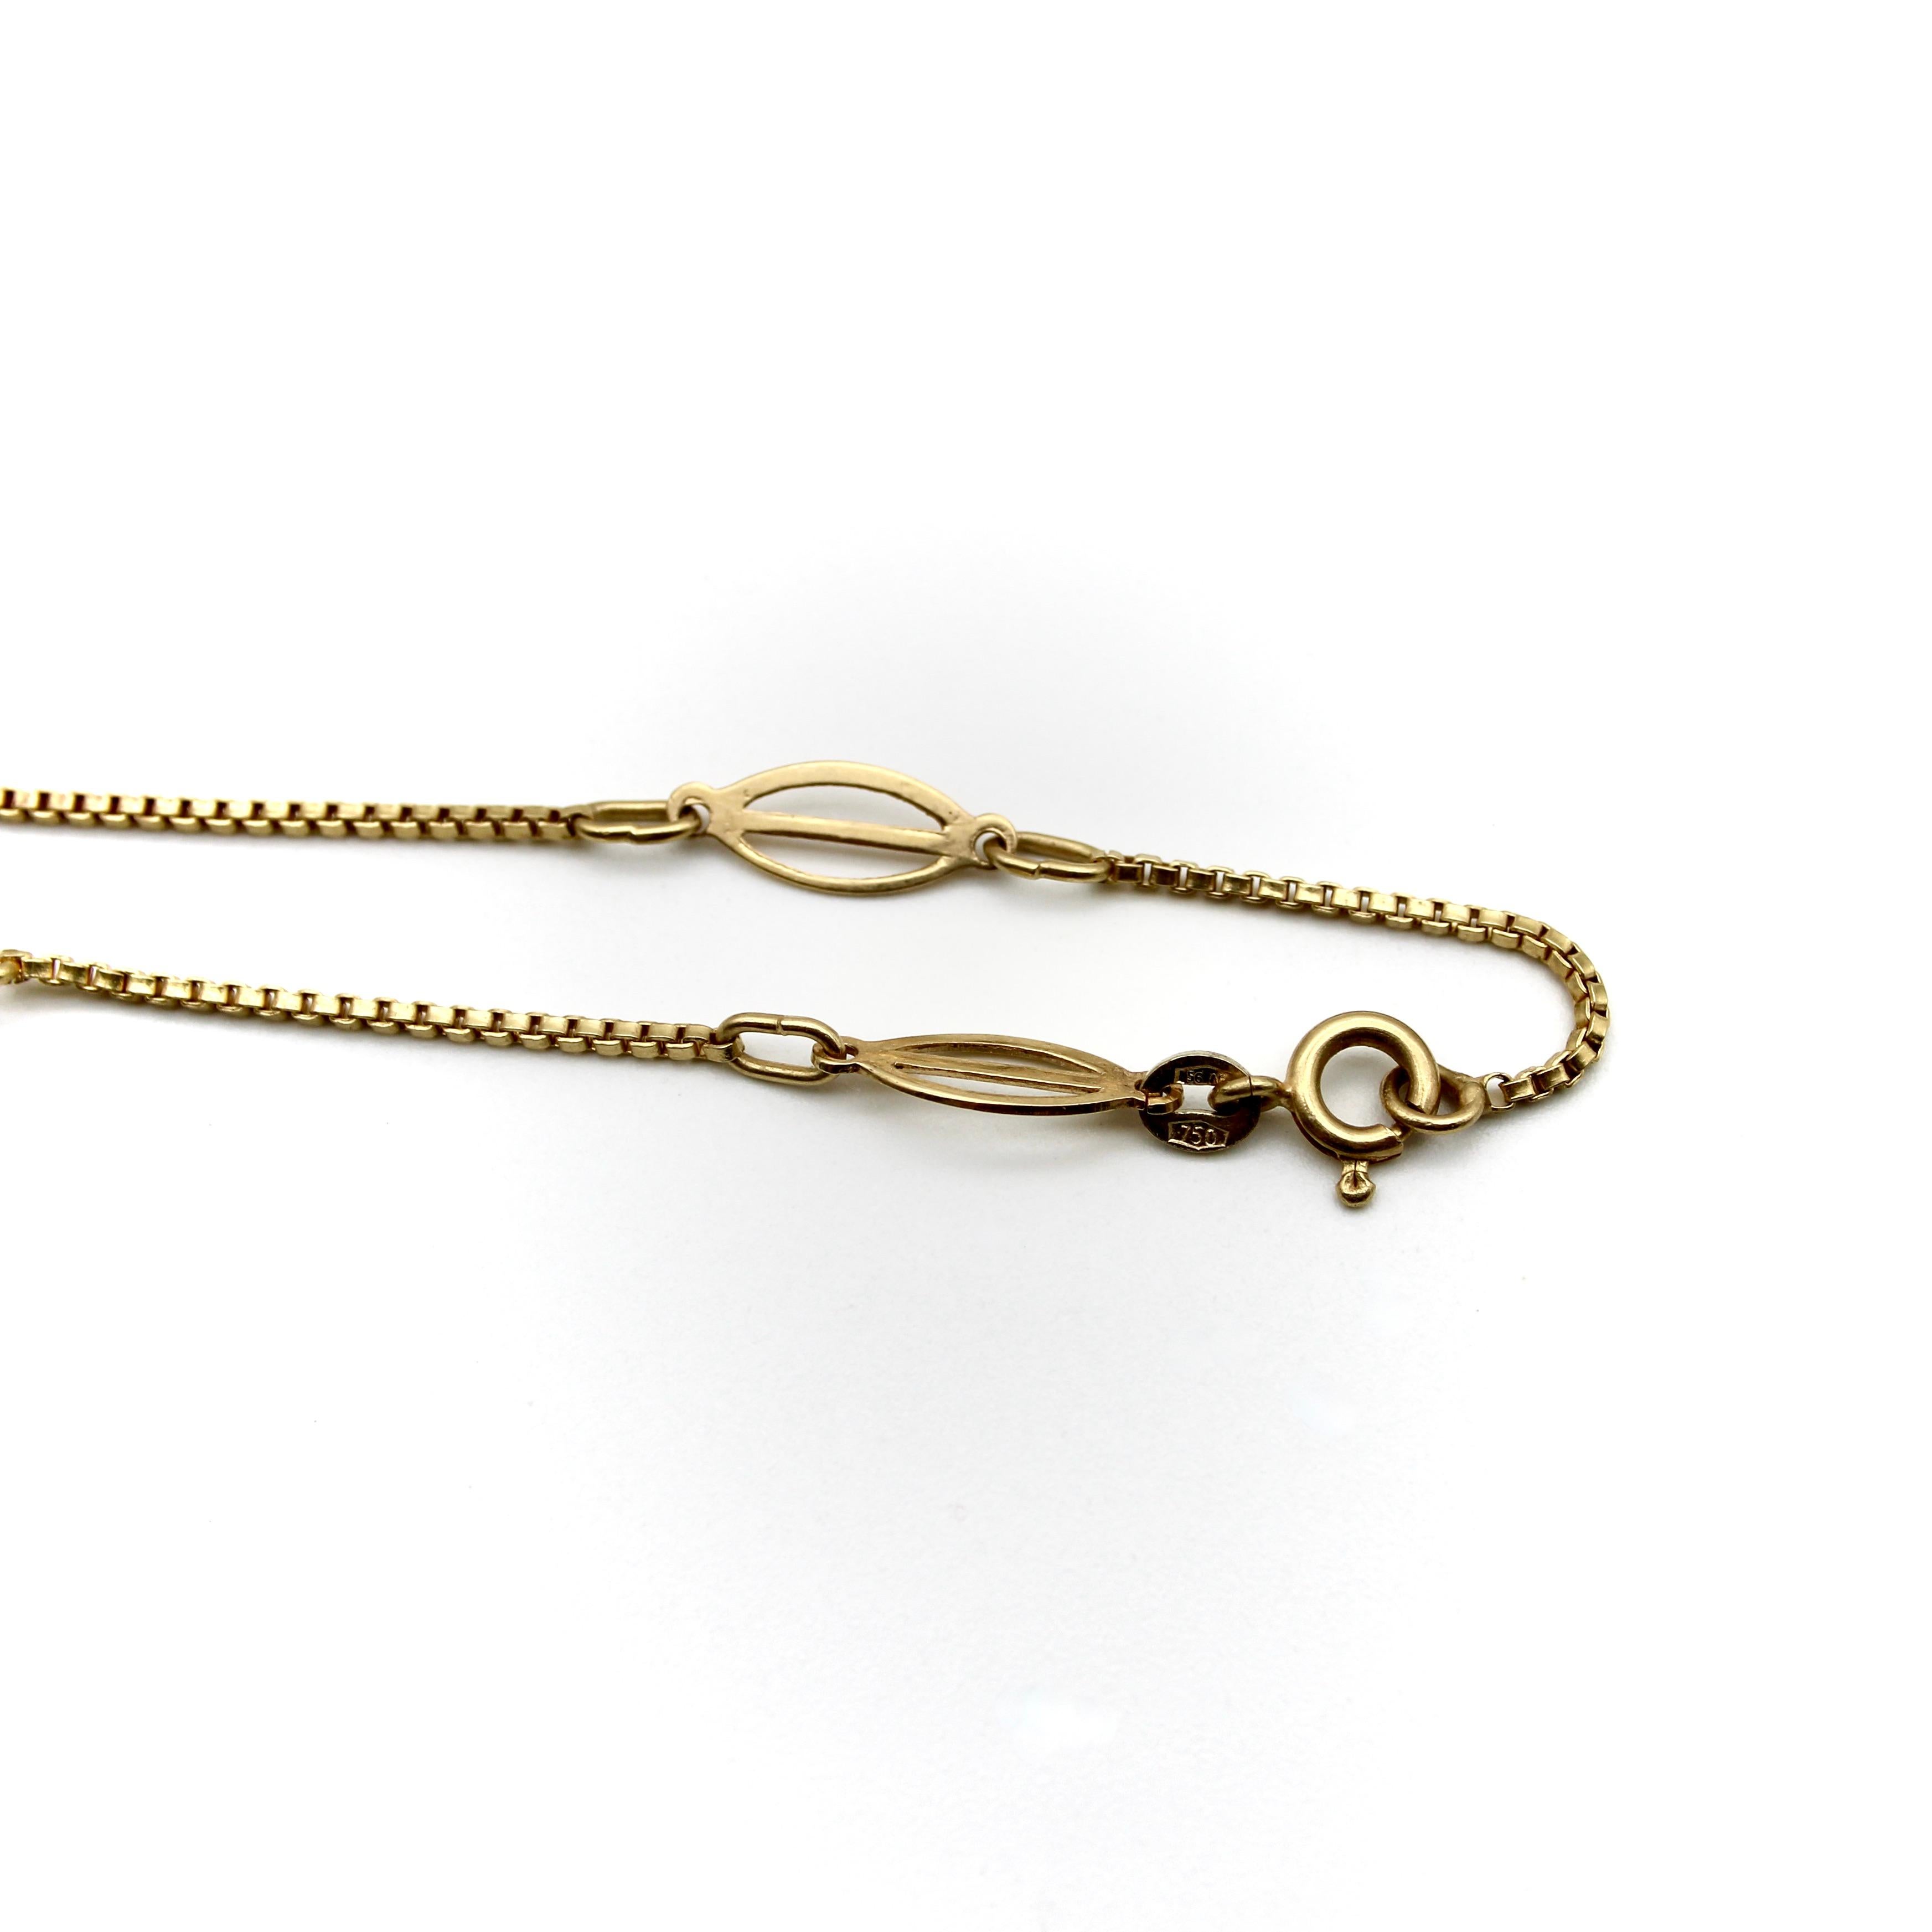 This 18k gold fancy link chain consists of elongated bisected oval links, sandwiched between sections of box link chain. The shape adds texture and reflects the light, making for a visually eye catching chain that is rhythmic is a way that is